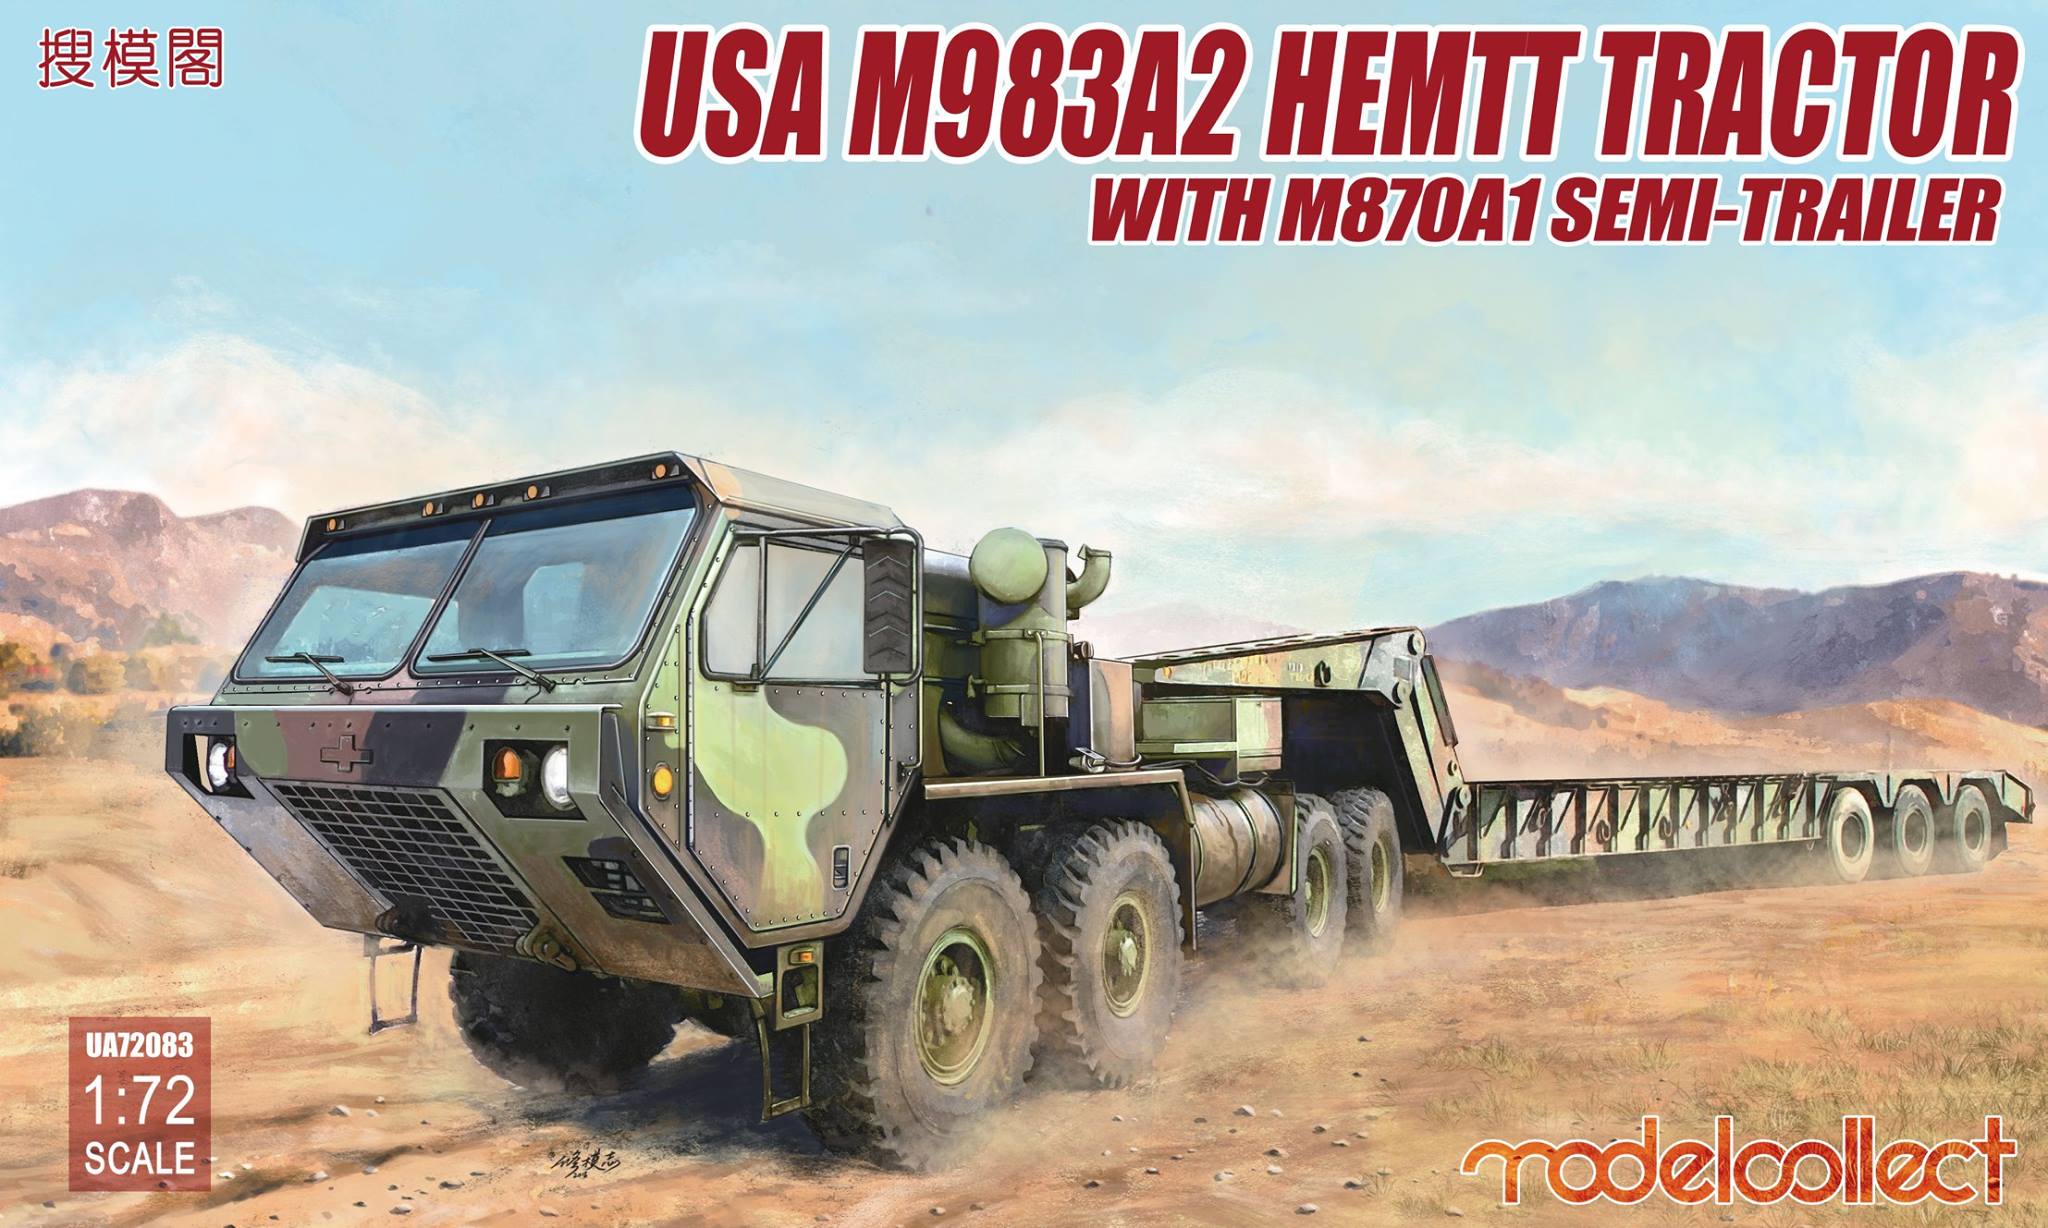 USA M983A2 HEMTT Tractor with M870A1 Semi-trailer